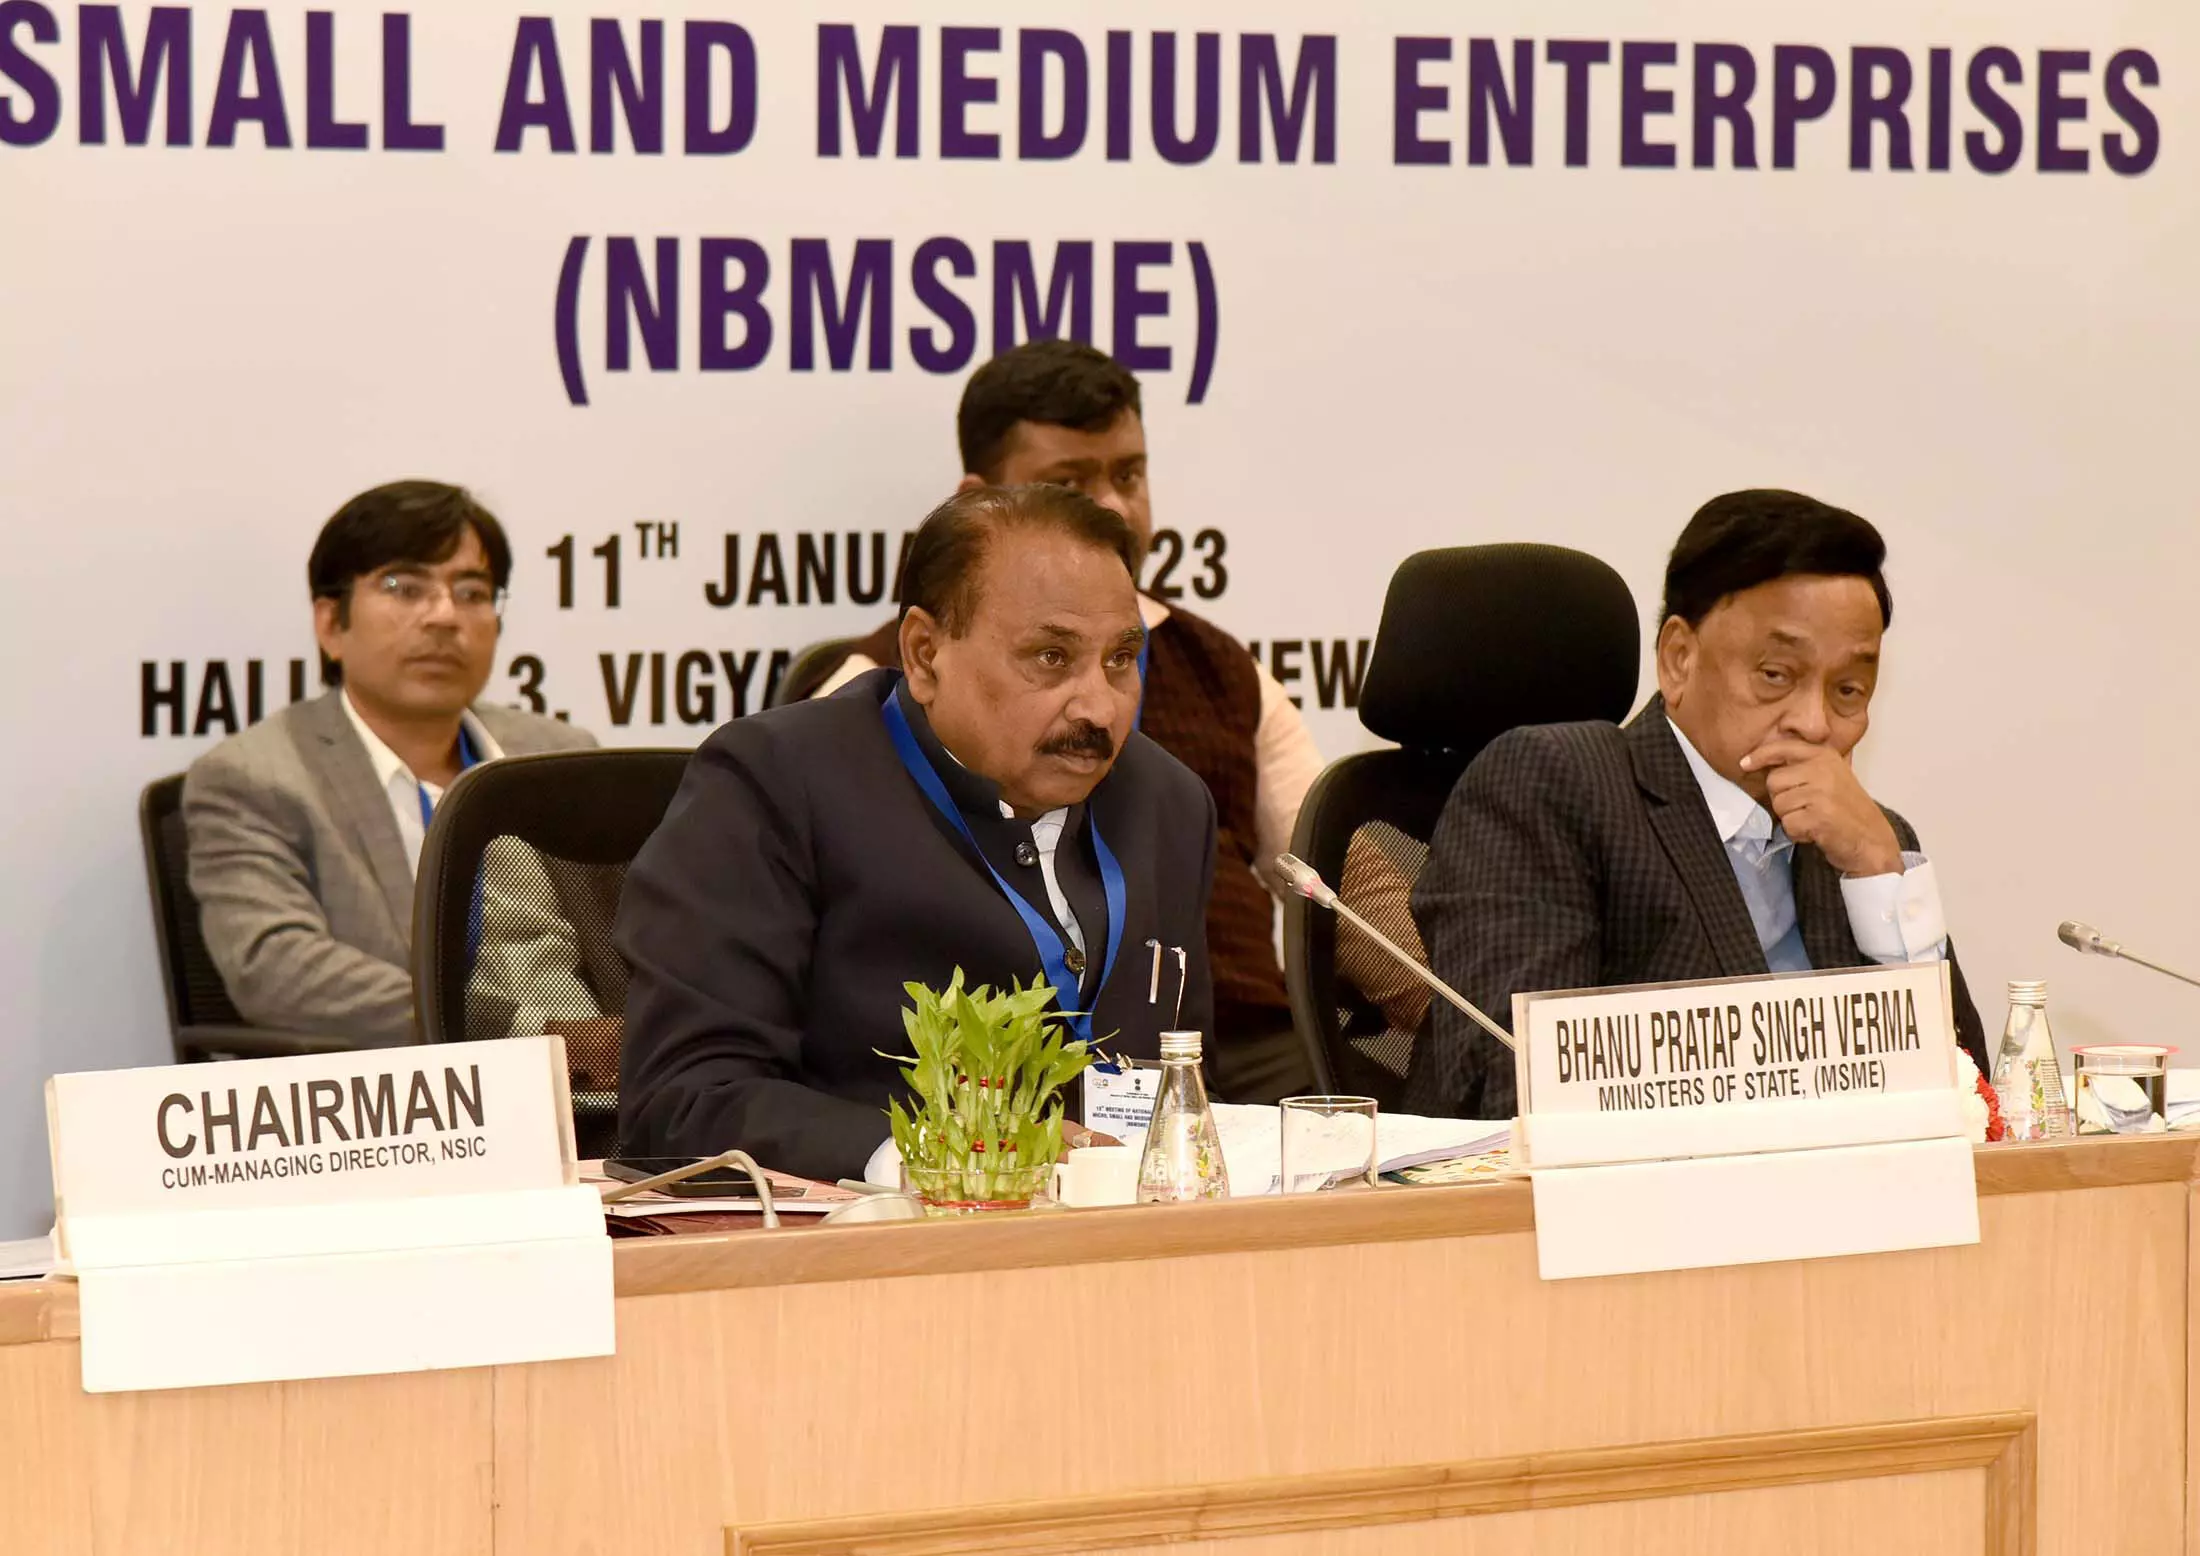 Central government unveils Rs. 50,000 crore support plan for MSMEs